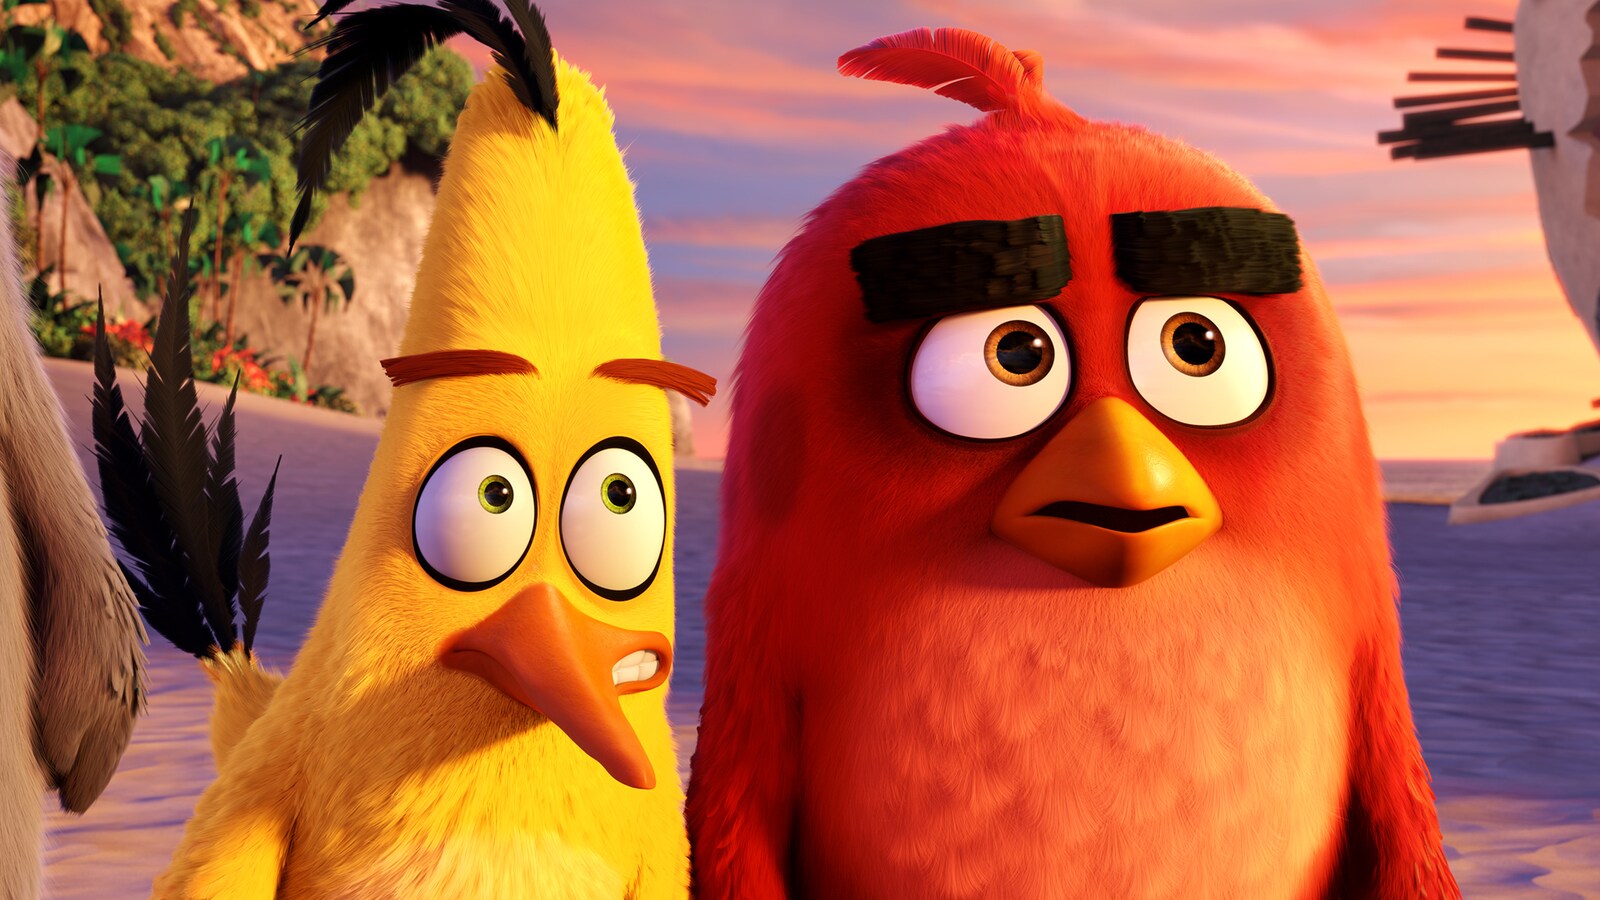 the-angry-birds-movie-2016